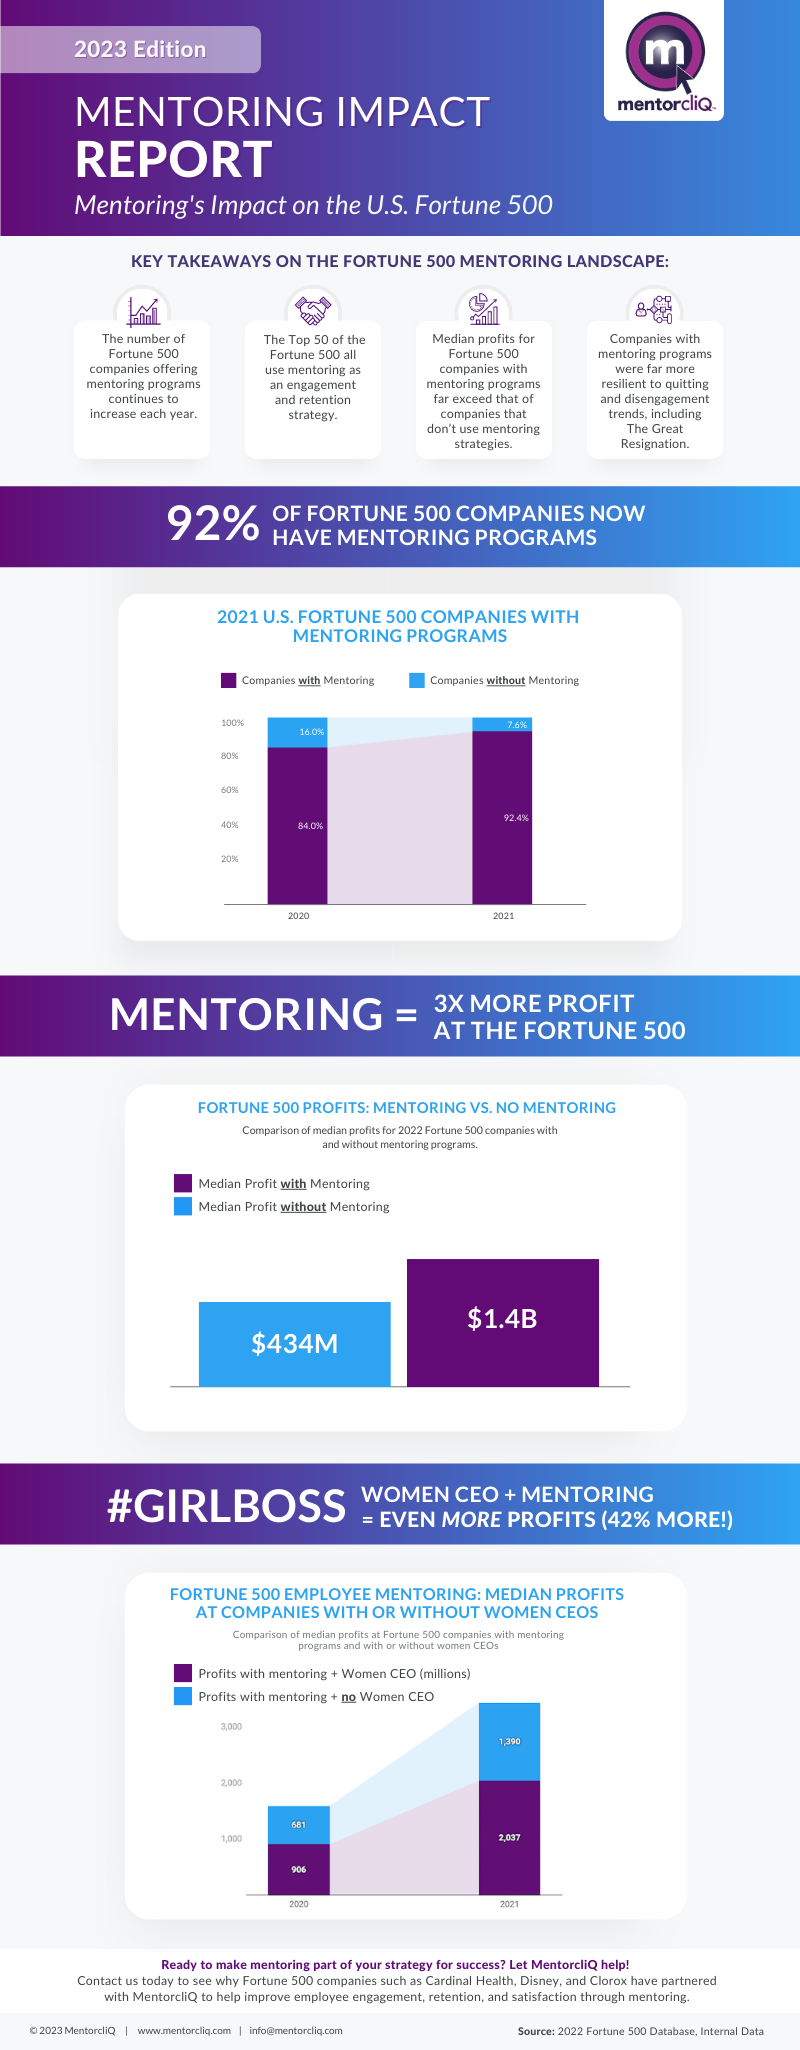 2023 Mentoring Impact Report Inforgraphic showing 92% of Fortune 500 companies now have mentoring programs.